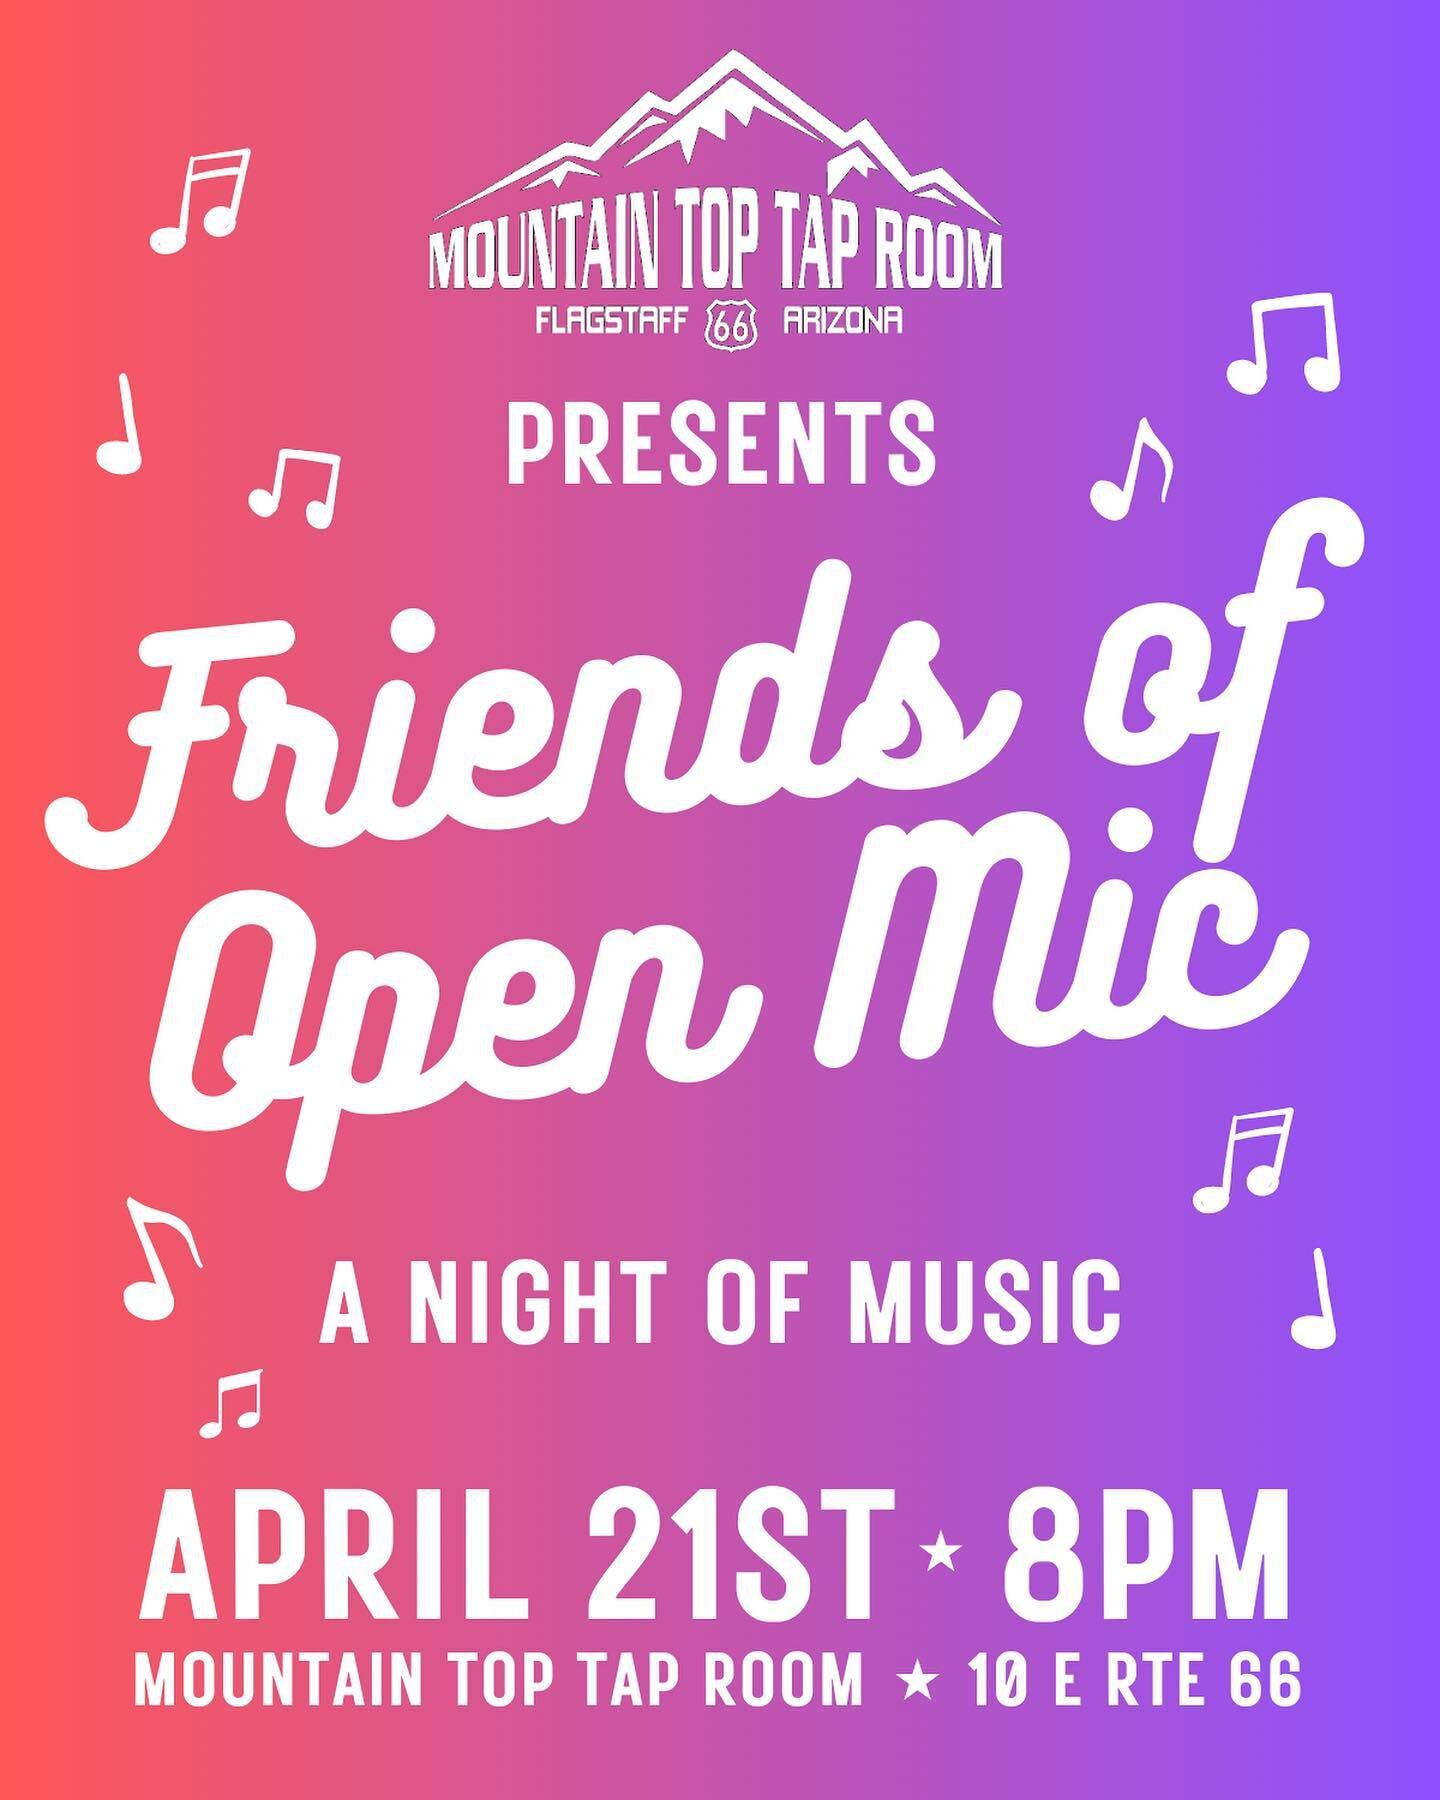 Tonight! 🎶 Come see your open mic favorites Jeremiah Curnalia, Double Trouble, Eric Caroffino, and Penguin Board Meeting! 🎶